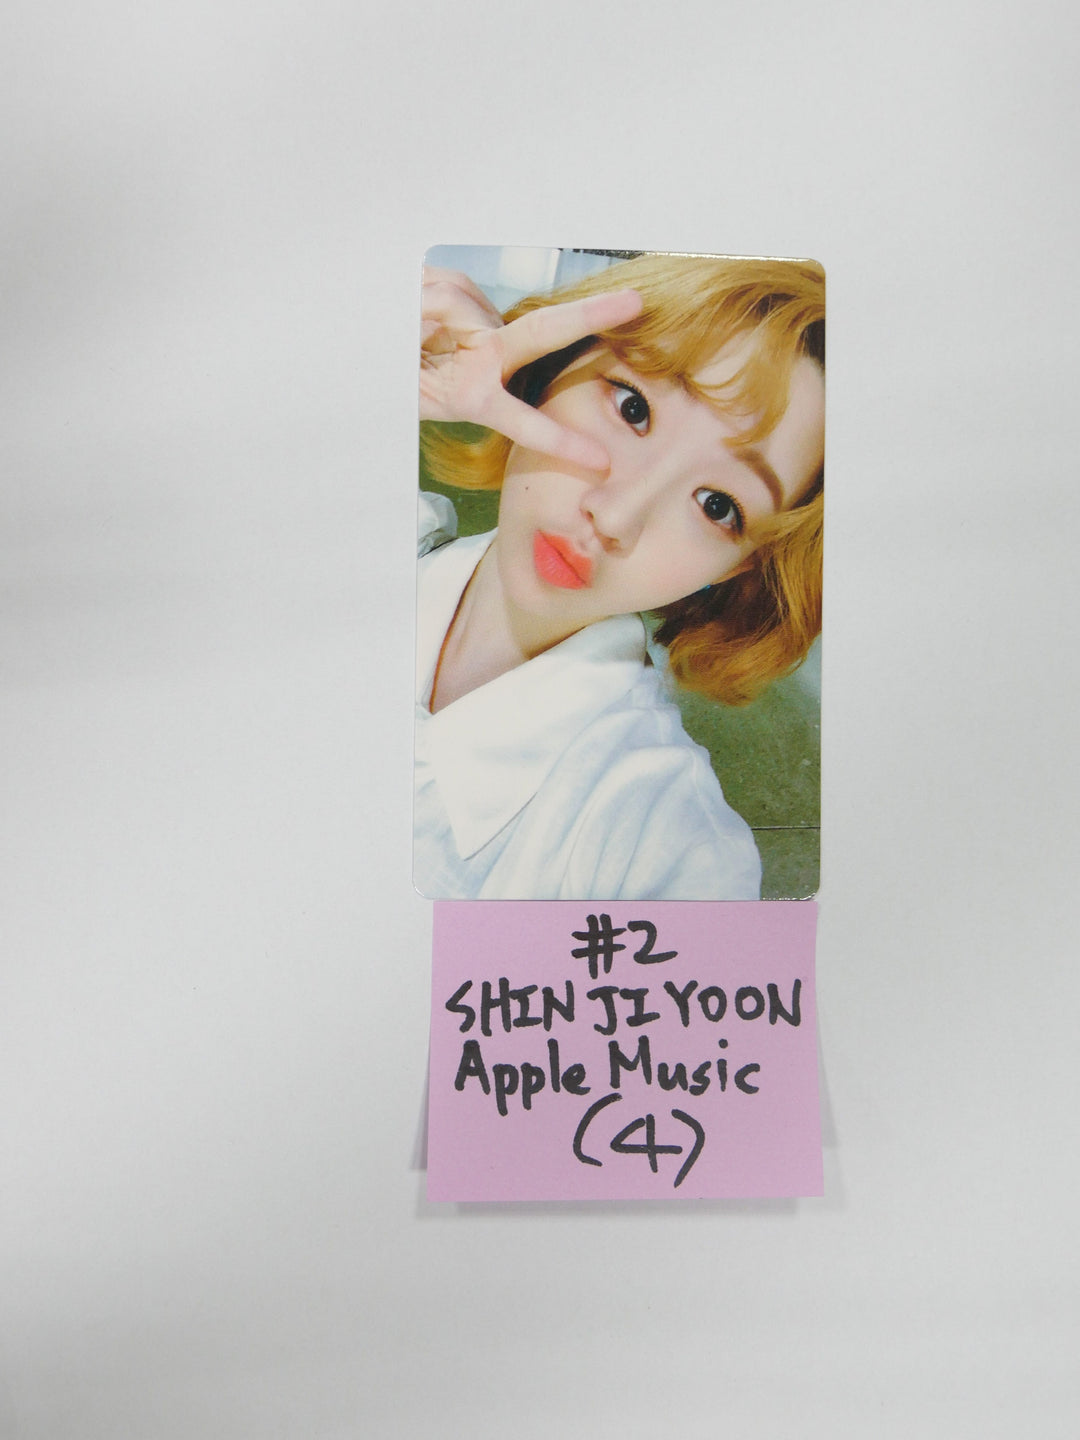 Weeekly "Play Game: Holiday" - Applemusic Fan Sign Event Photocard Round 2